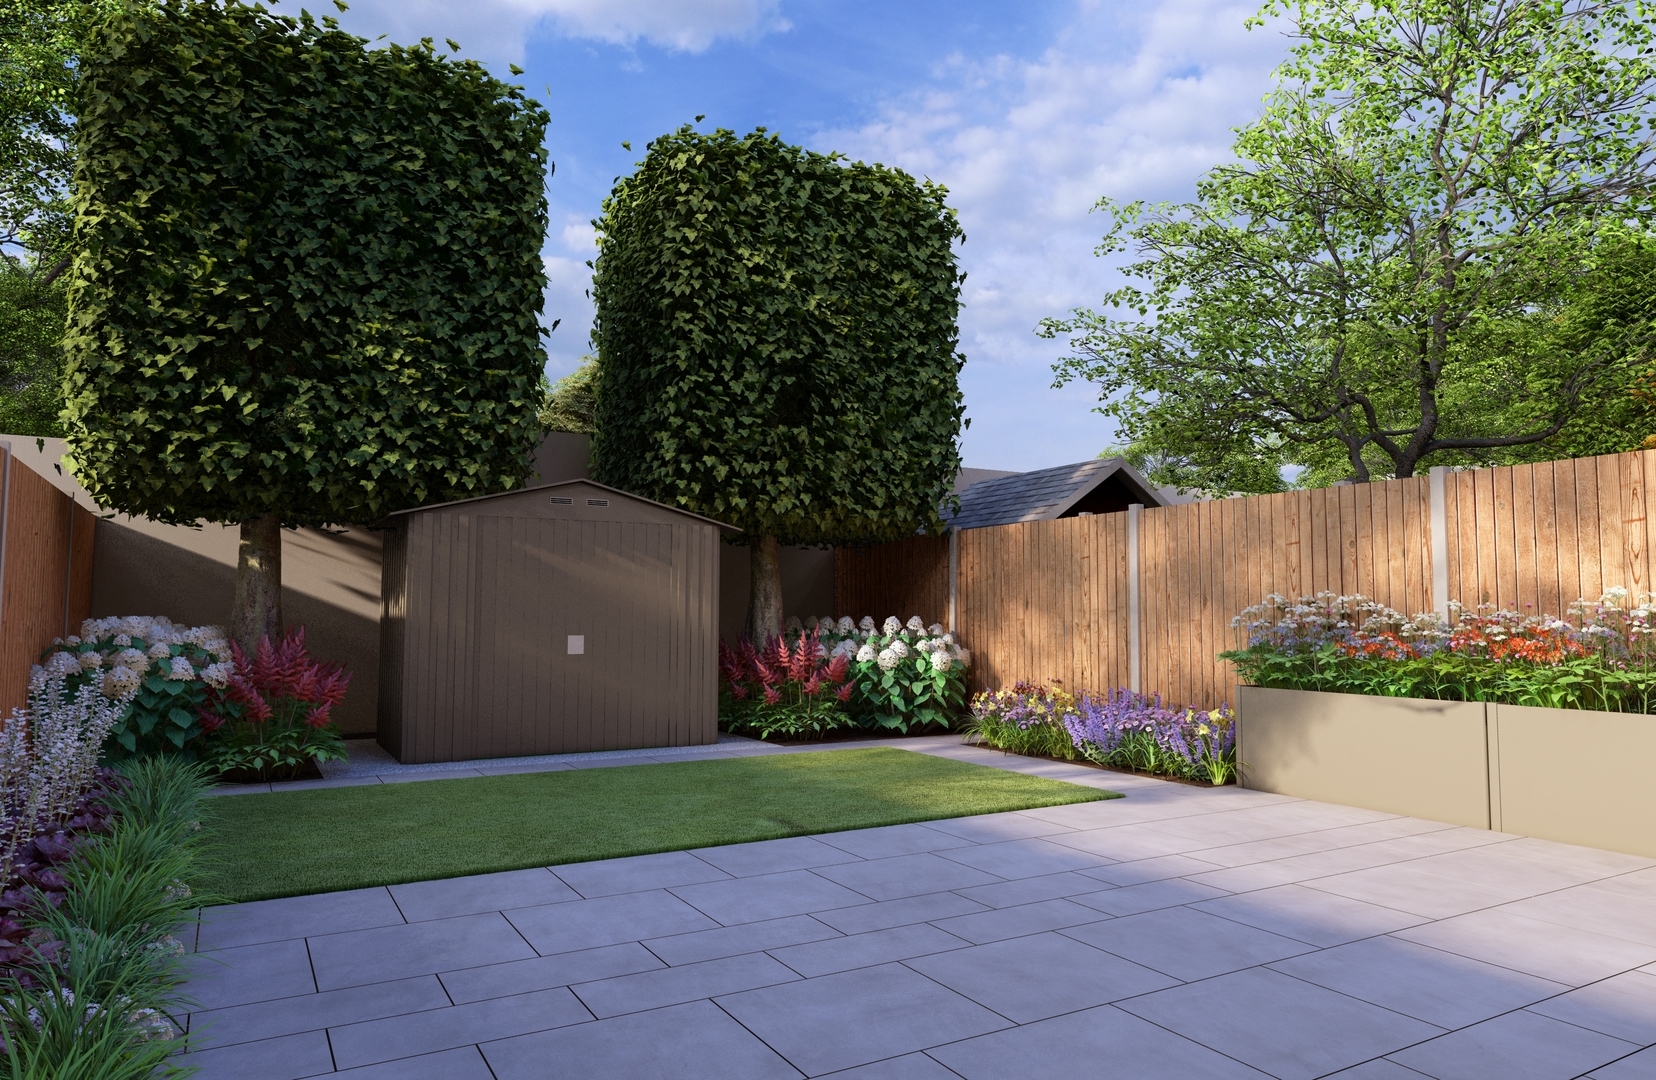 Garden Design Dublin 9 features natural limestone paving, Biohort Garden Shed & Belvedere Planter Beds, mature pleached trees and colourful perennial planted borders.